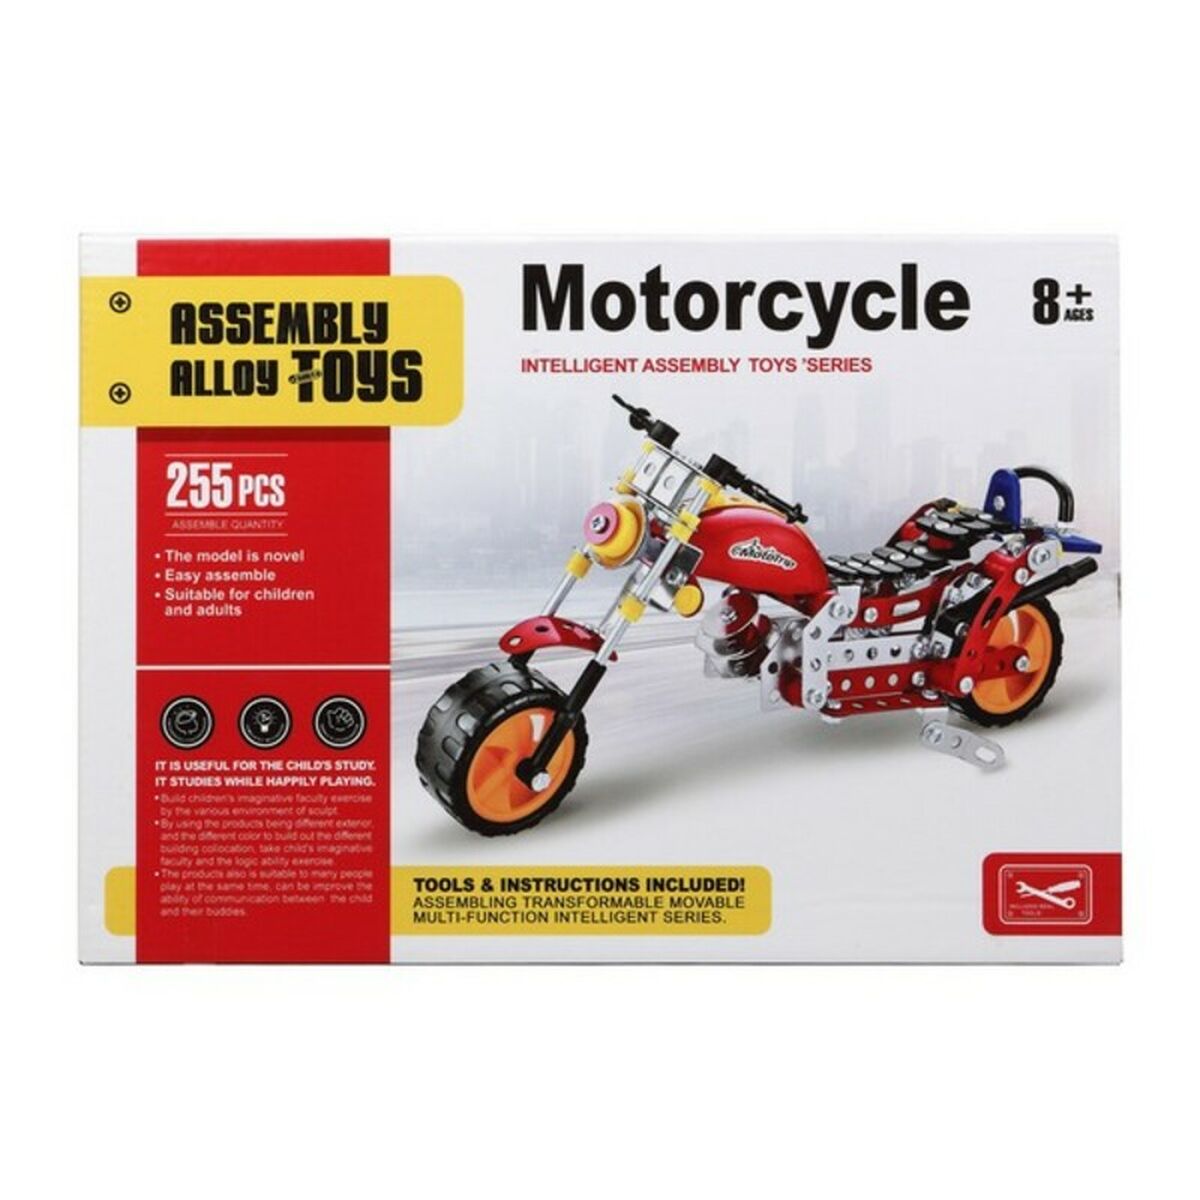 Construction set Motorcycle 117530 (255 pcs) Red